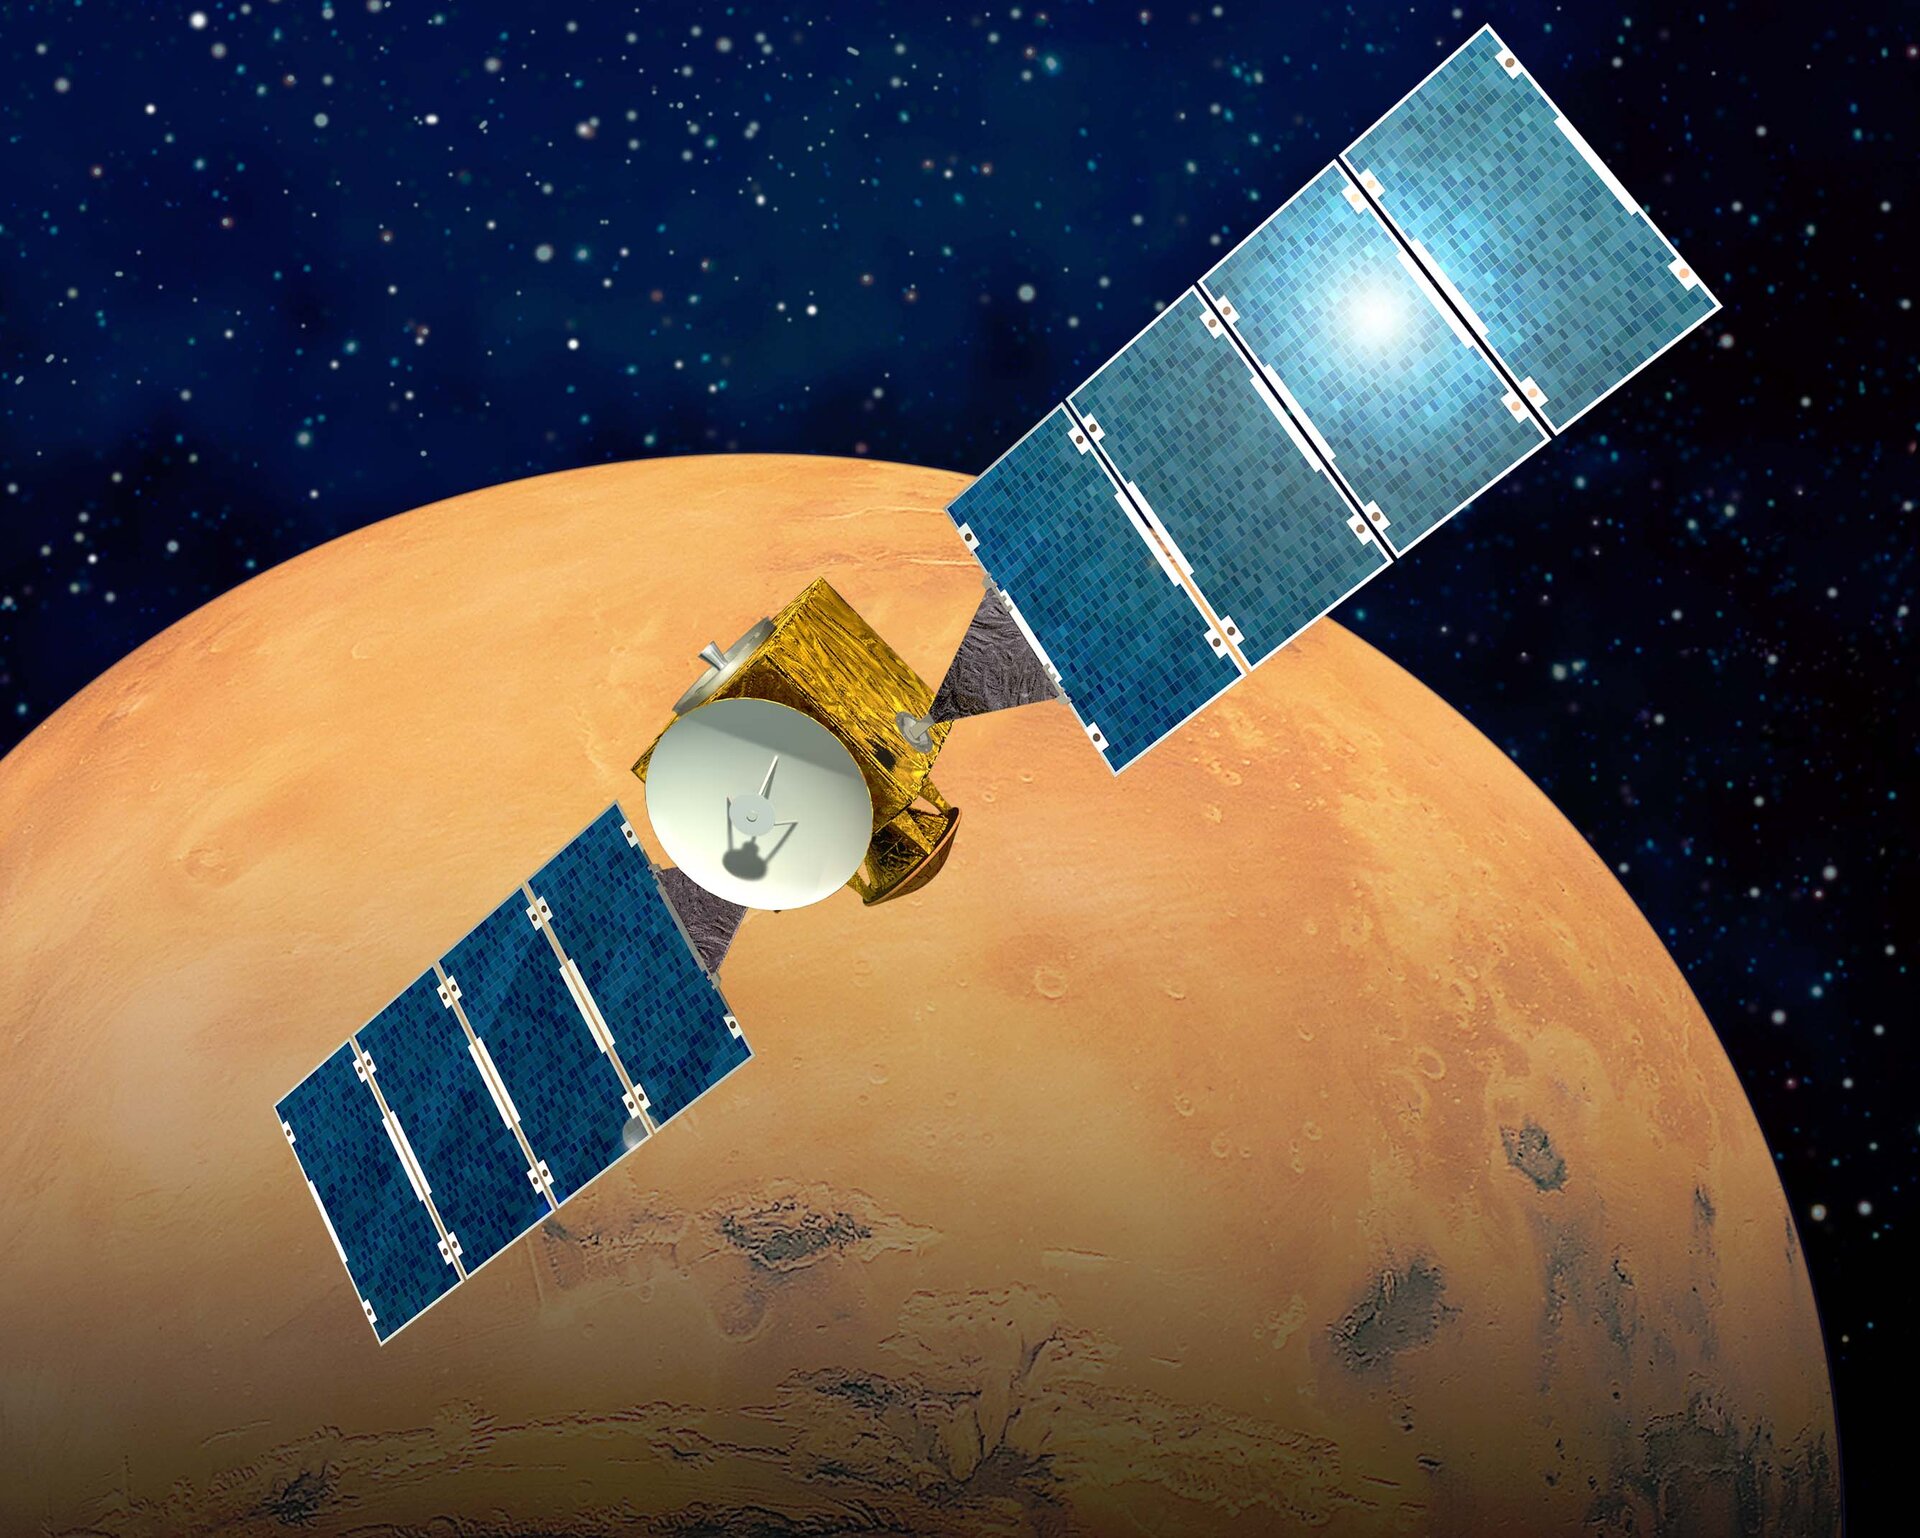 Mars Express will be launched on 23 May 2003